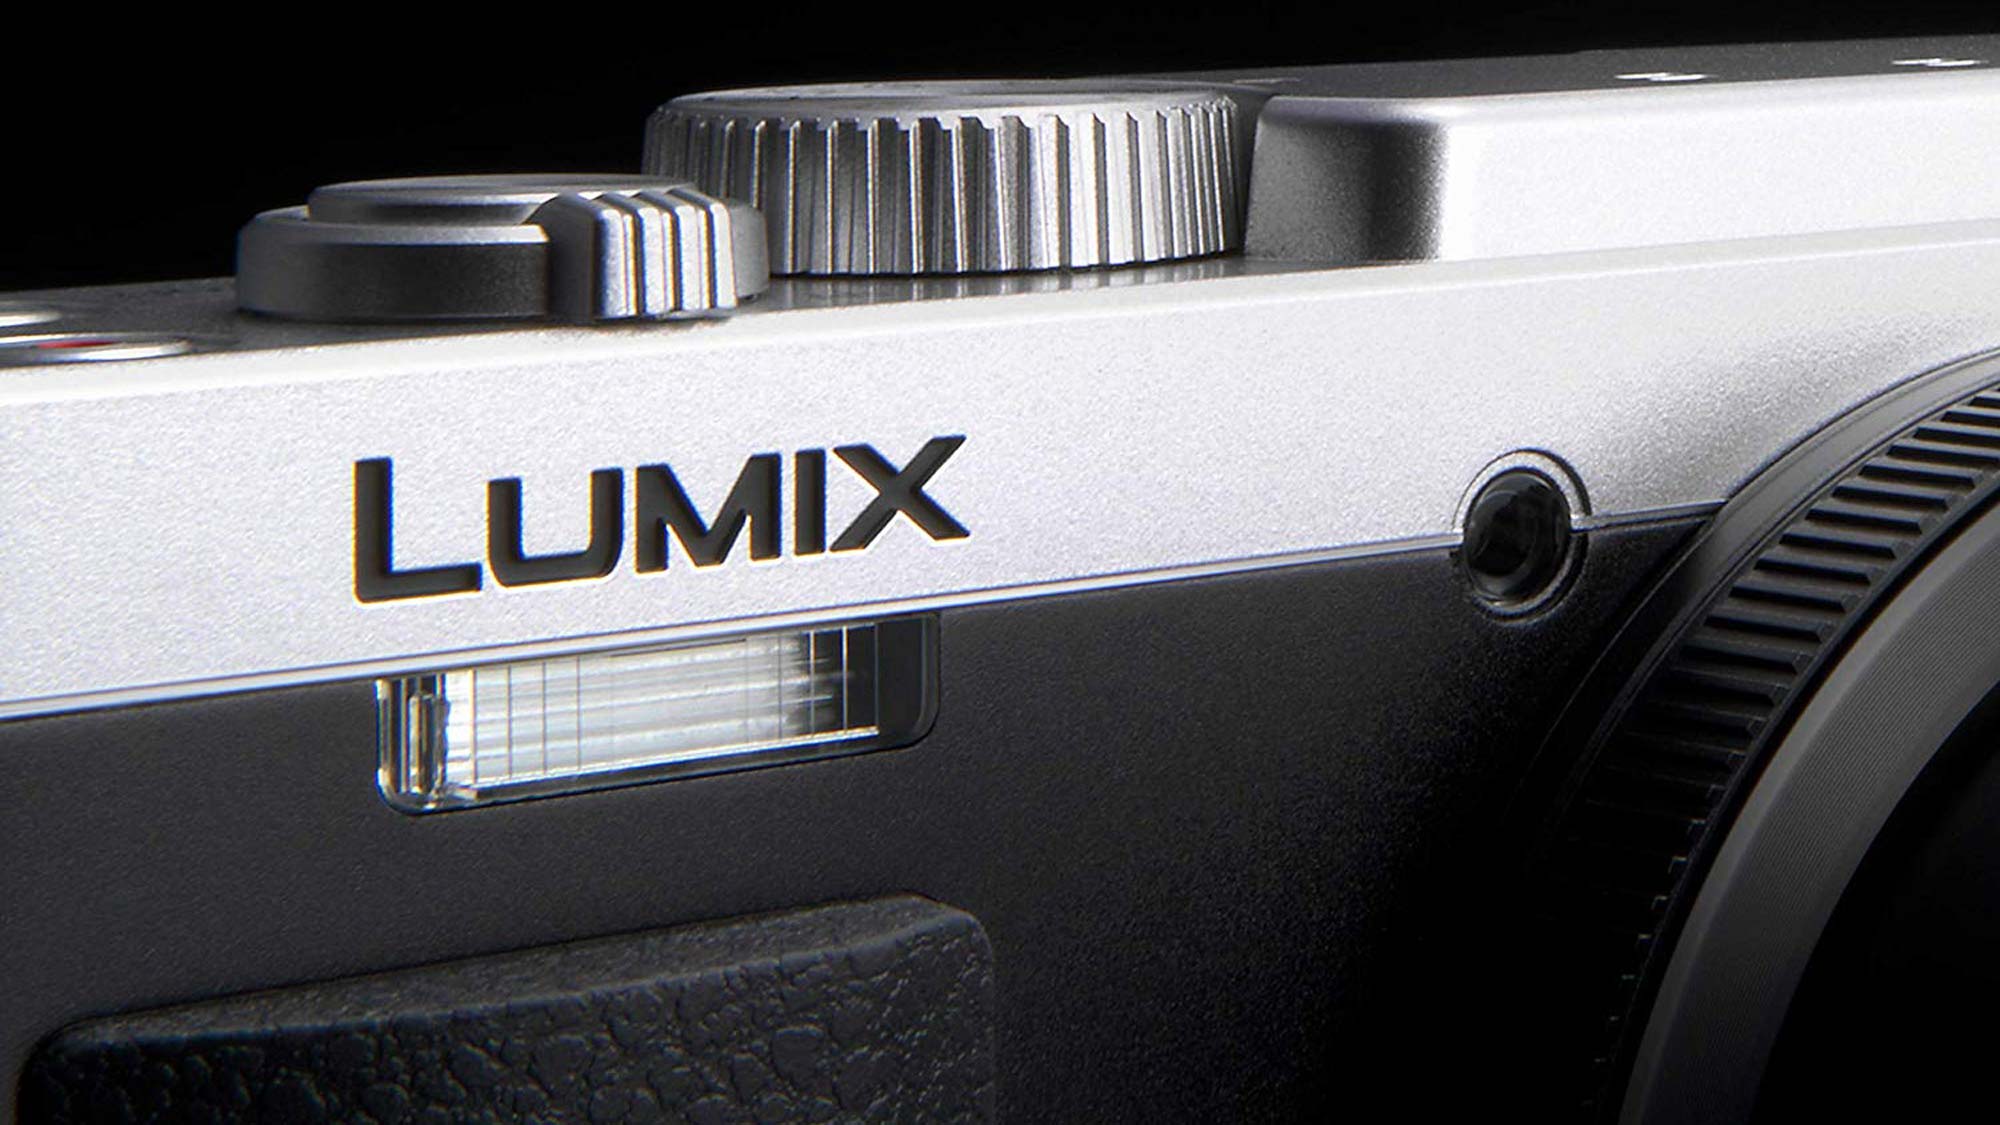 boter Snel verbanning Panasonic Lumix ZS80 review: Great All-Around Compact Zoom | Tom's Guide